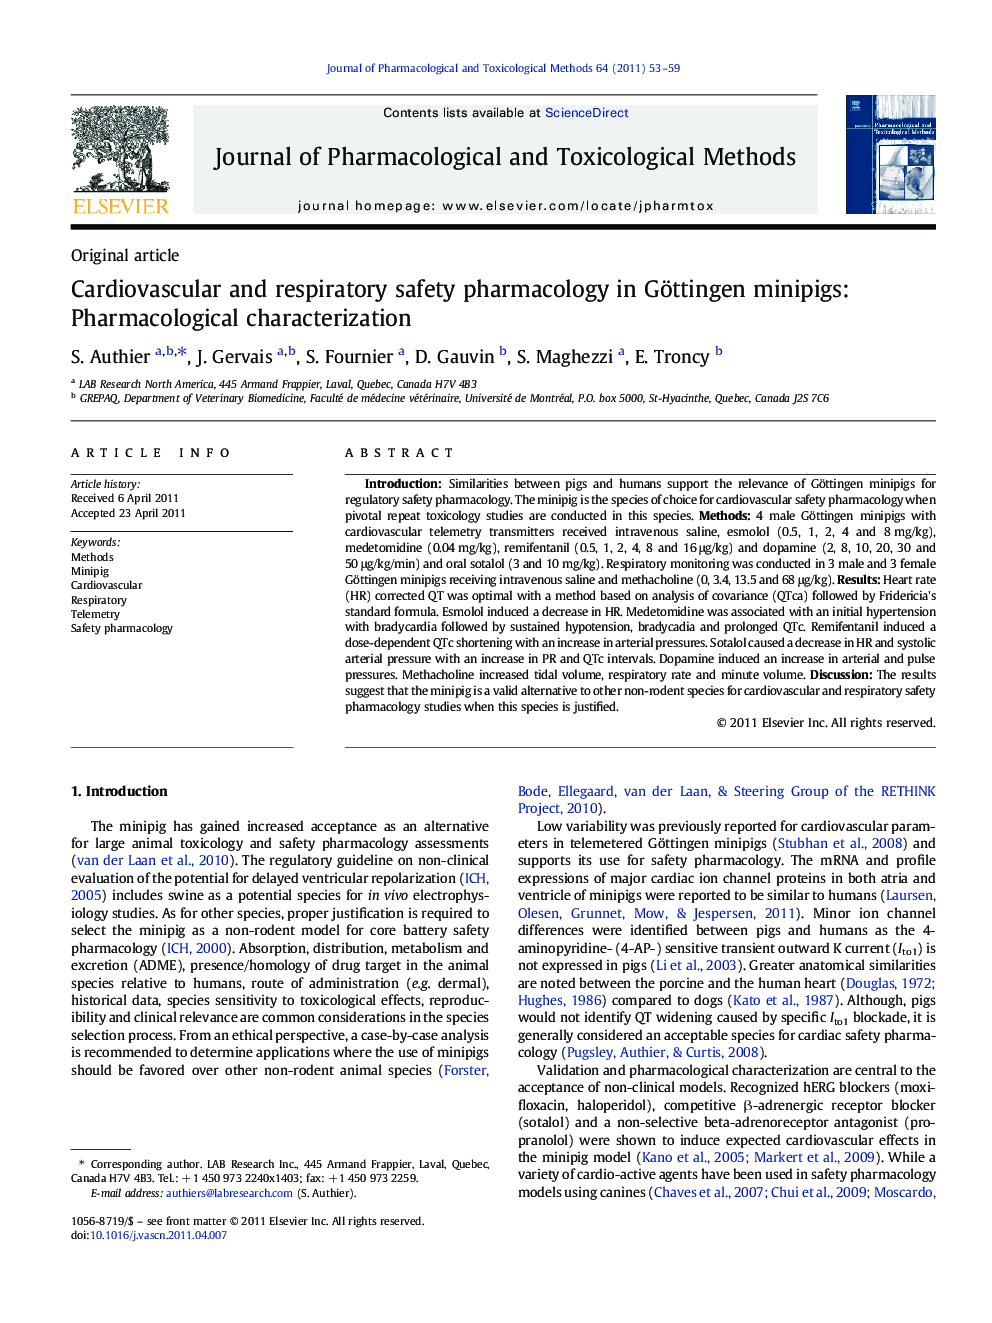 Cardiovascular and respiratory safety pharmacology in Göttingen minipigs: Pharmacological characterization